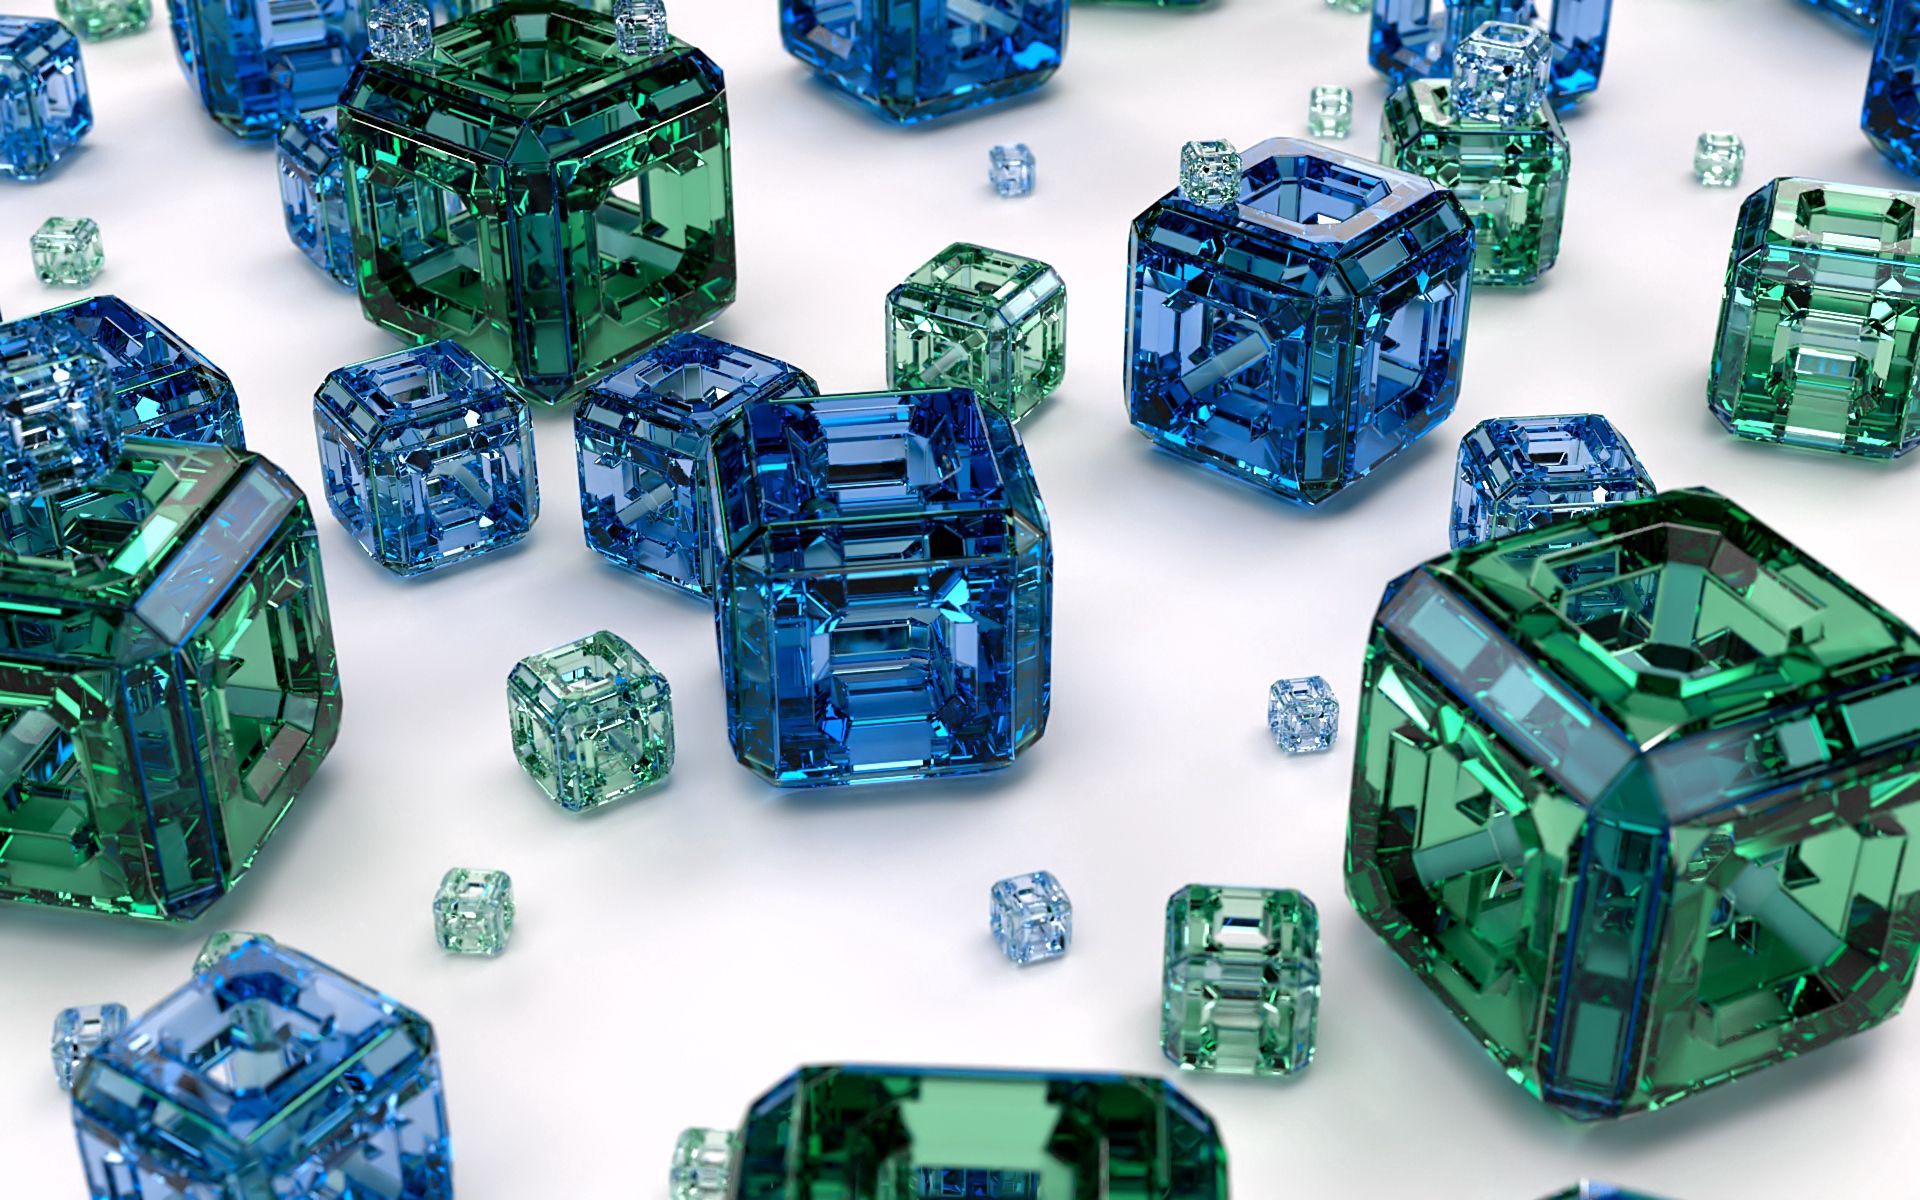 56461 2560x1080 PC pictures for free, download 3d, blue, glass, cubes 2560x1080 wallpapers on your desktop